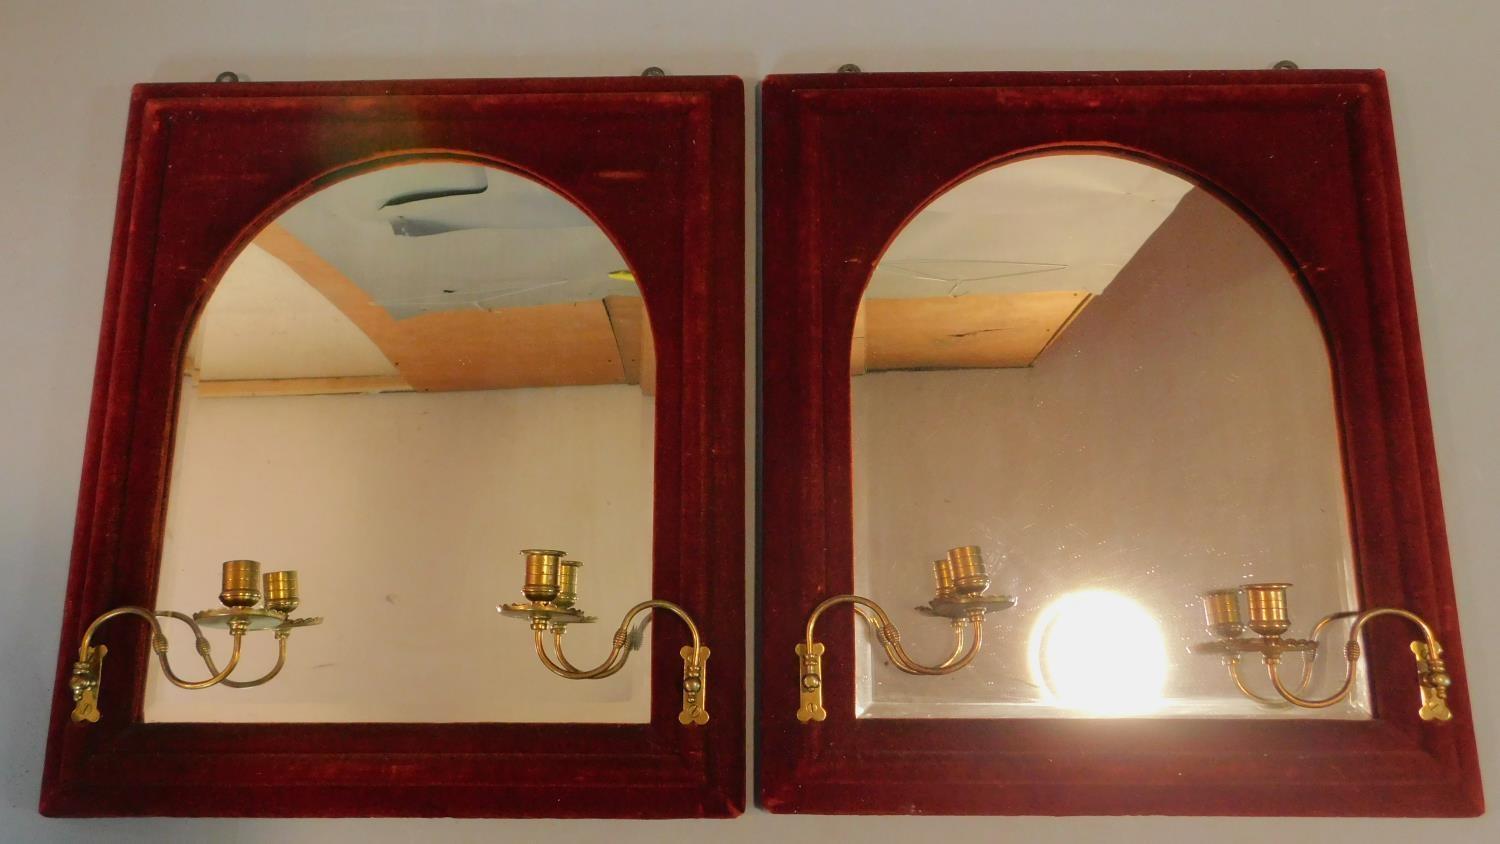 An unusual pair of arched Victorian pier mirrors in red velvet frames fitted with candle sconces.